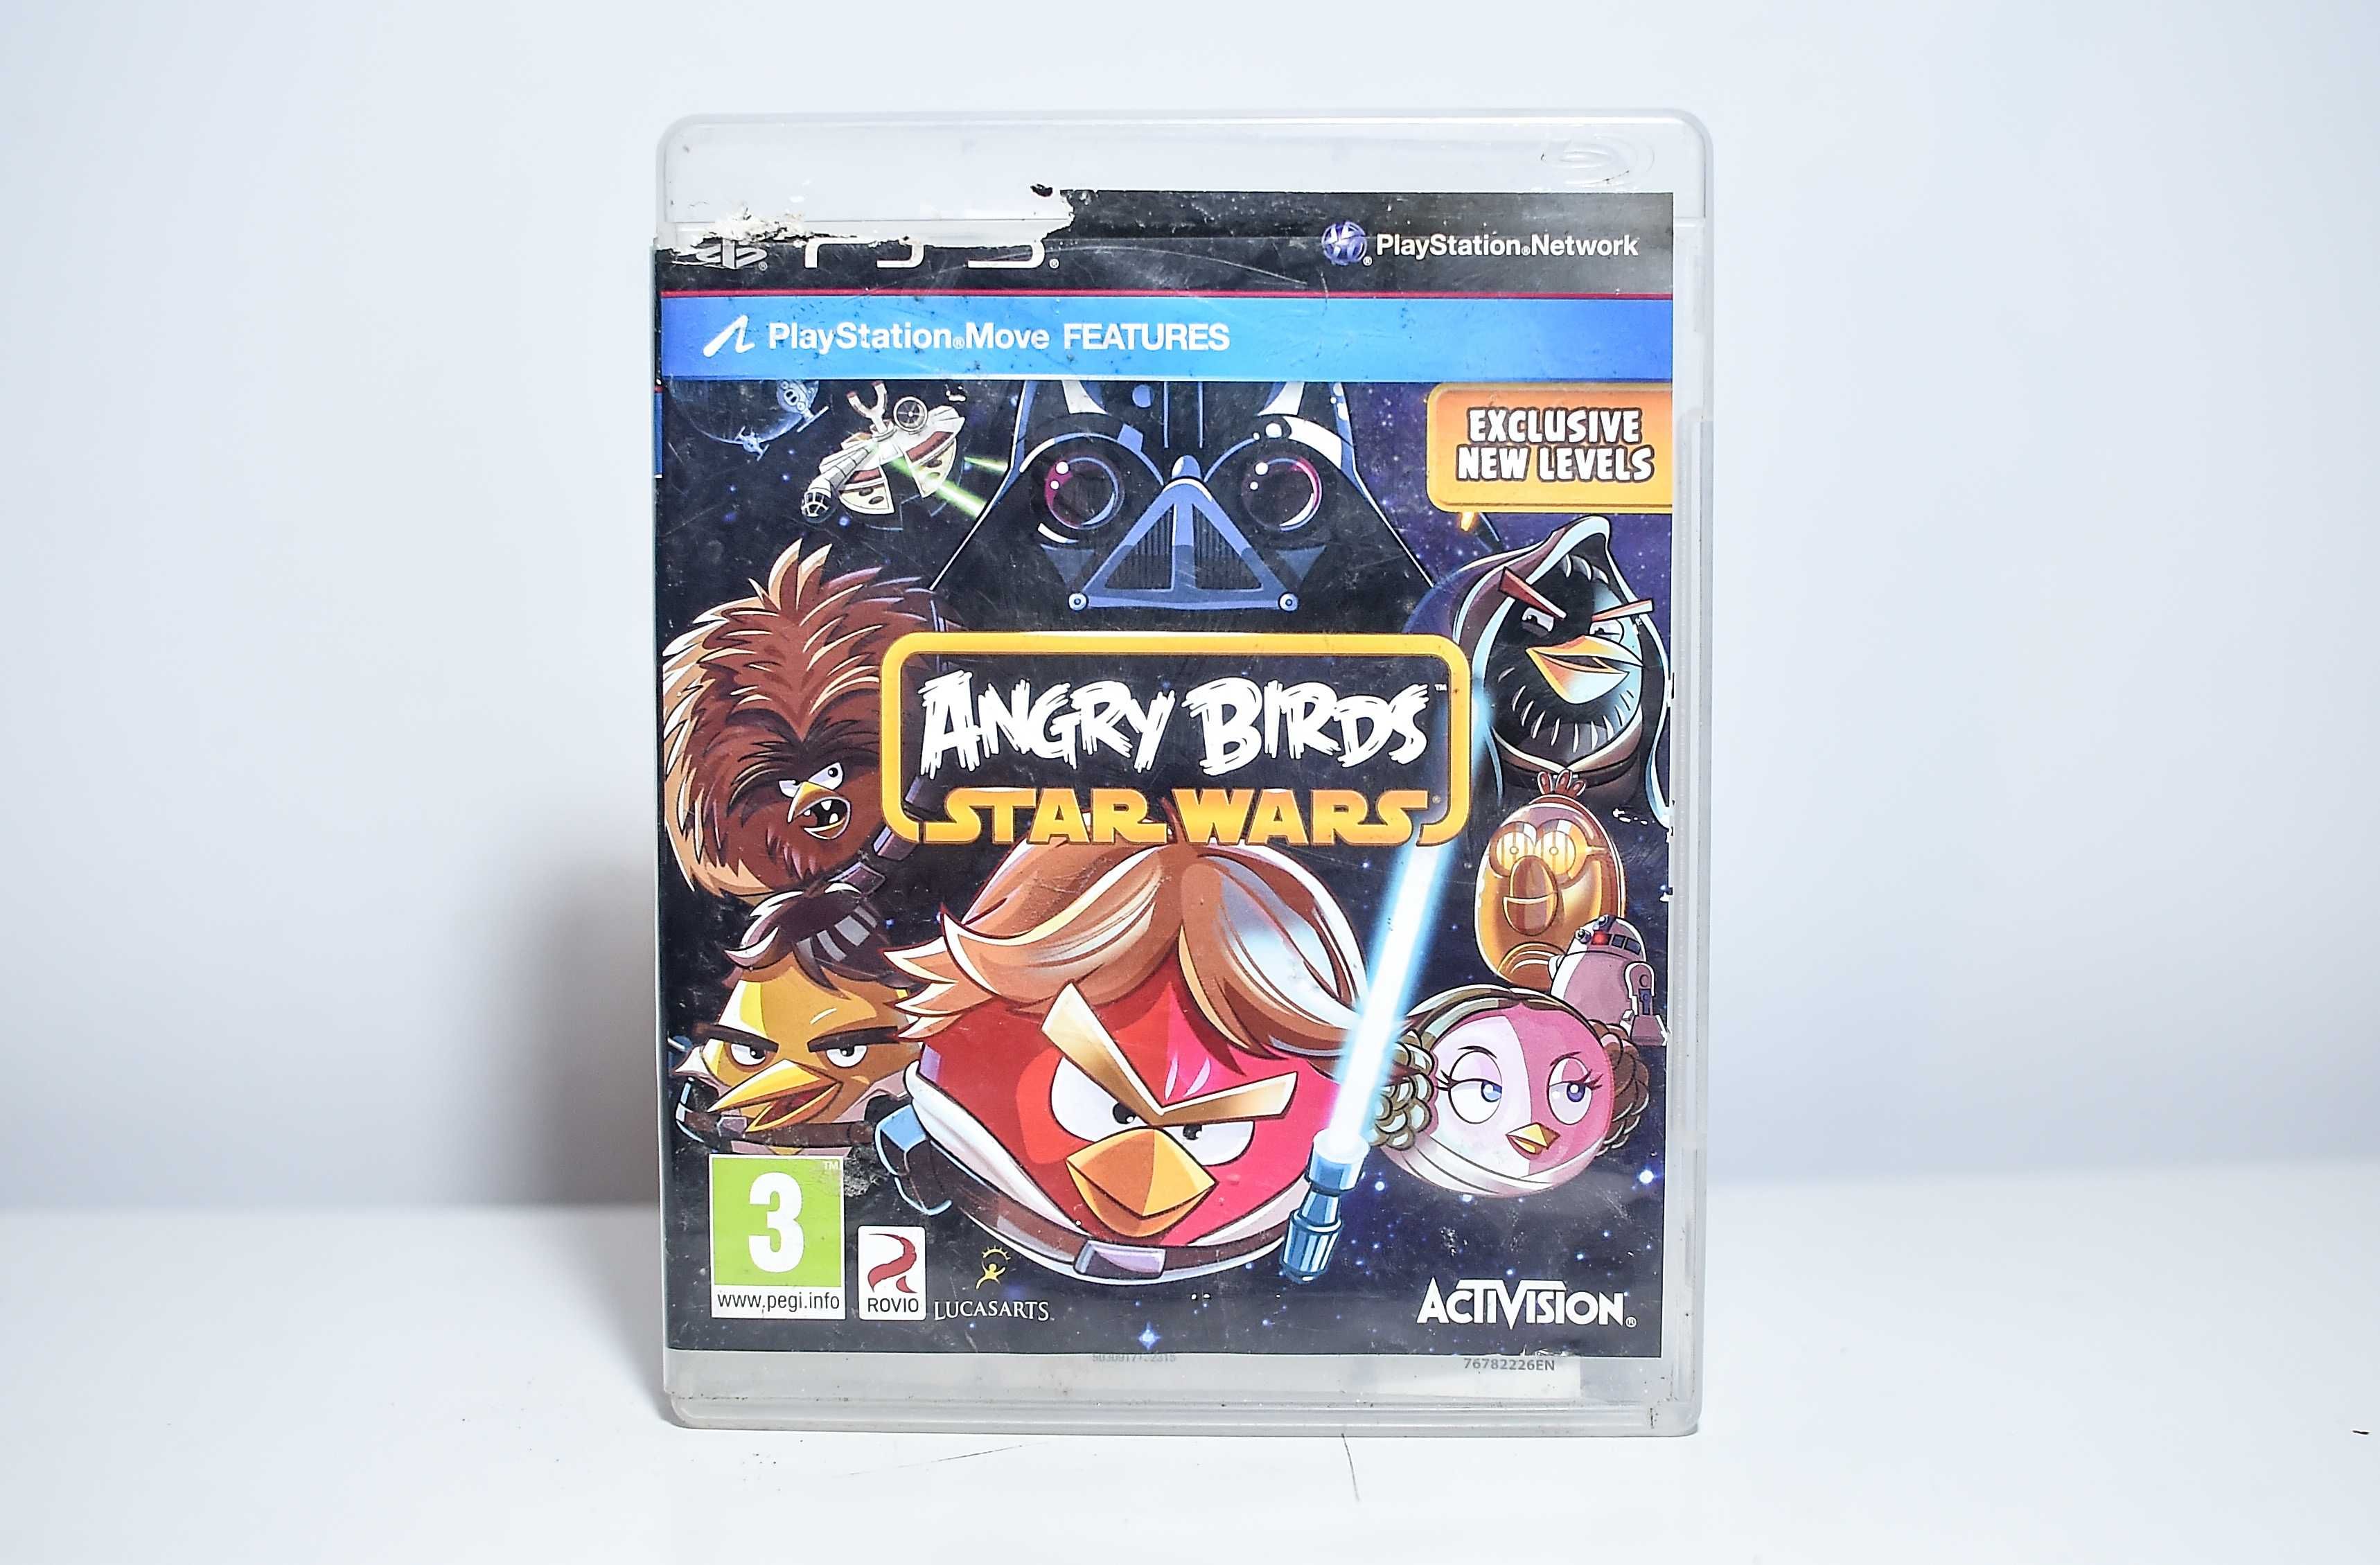 PS3 # Angry Birds Star Wars